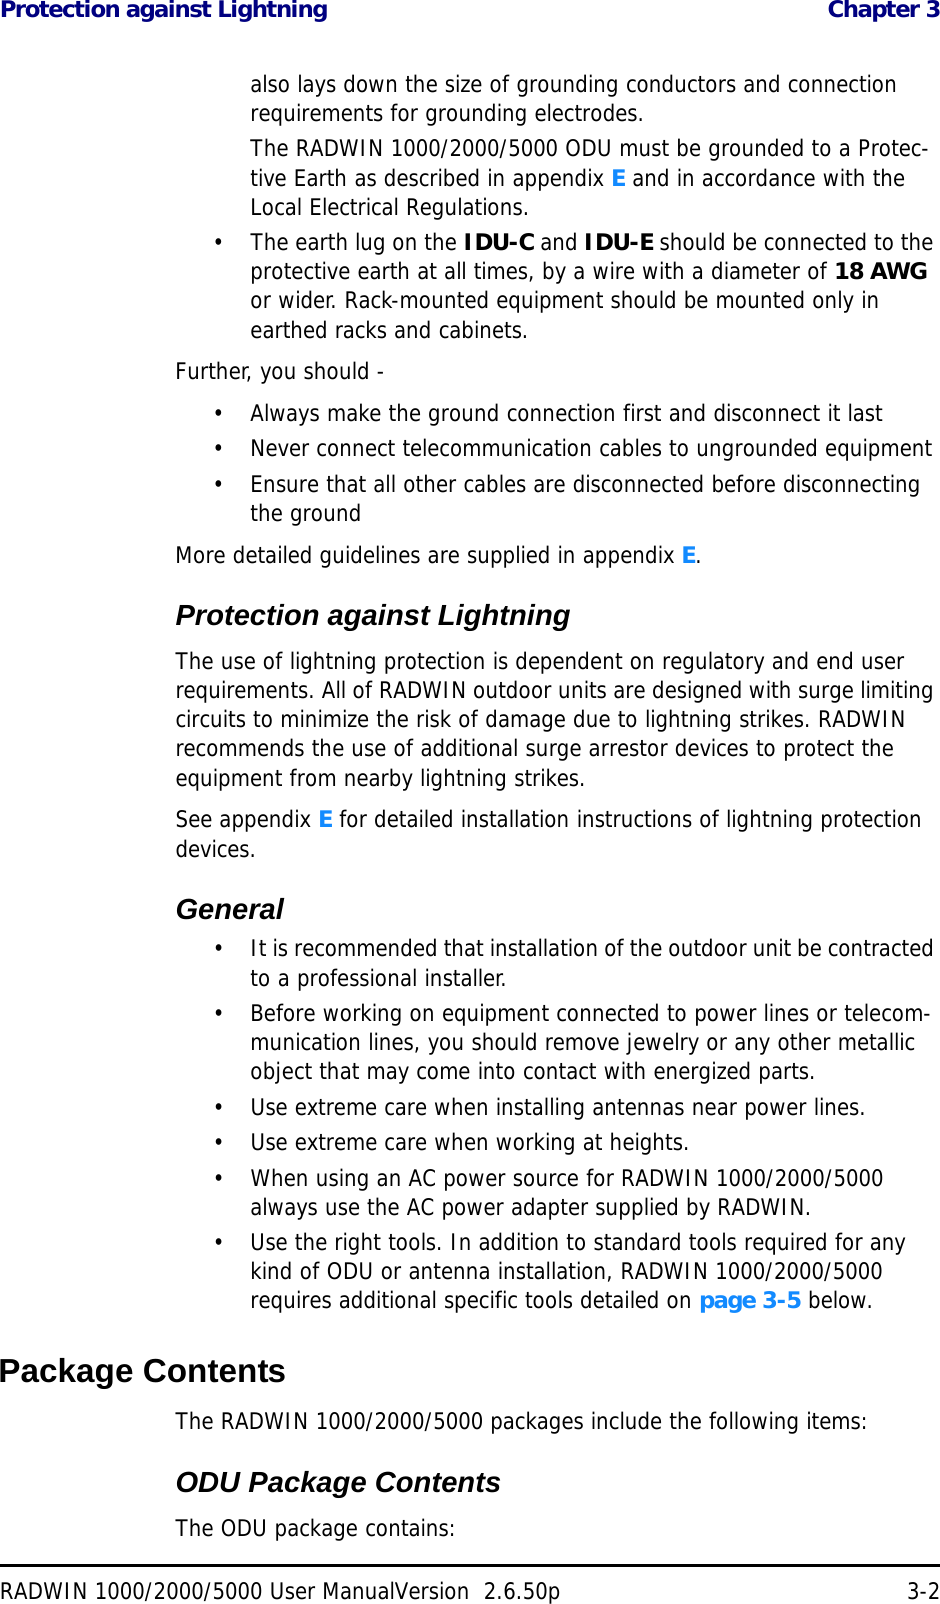 Protection against Lightning  Chapter 3RADWIN 1000/2000/5000 User ManualVersion  2.6.50p 3-2also lays down the size of grounding conductors and connection requirements for grounding electrodes.The RADWIN 1000/2000/5000 ODU must be grounded to a Protec-tive Earth as described in appendix E and in accordance with the Local Electrical Regulations.• The earth lug on the IDU-C and IDU-E should be connected to the protective earth at all times, by a wire with a diameter of 18 AWG or wider. Rack-mounted equipment should be mounted only in earthed racks and cabinets.Further, you should -• Always make the ground connection first and disconnect it last• Never connect telecommunication cables to ungrounded equipment• Ensure that all other cables are disconnected before disconnecting the groundMore detailed guidelines are supplied in appendix E.Protection against LightningThe use of lightning protection is dependent on regulatory and end user requirements. All of RADWIN outdoor units are designed with surge limiting circuits to minimize the risk of damage due to lightning strikes. RADWIN recommends the use of additional surge arrestor devices to protect the equipment from nearby lightning strikes.See appendix E for detailed installation instructions of lightning protection devices.General• It is recommended that installation of the outdoor unit be contracted to a professional installer.• Before working on equipment connected to power lines or telecom-munication lines, you should remove jewelry or any other metallic object that may come into contact with energized parts.• Use extreme care when installing antennas near power lines.• Use extreme care when working at heights.• When using an AC power source for RADWIN 1000/2000/5000 always use the AC power adapter supplied by RADWIN.• Use the right tools. In addition to standard tools required for any kind of ODU or antenna installation, RADWIN 1000/2000/5000 requires additional specific tools detailed on page 3-5 below.Package ContentsThe RADWIN 1000/2000/5000 packages include the following items:ODU Package ContentsThe ODU package contains: